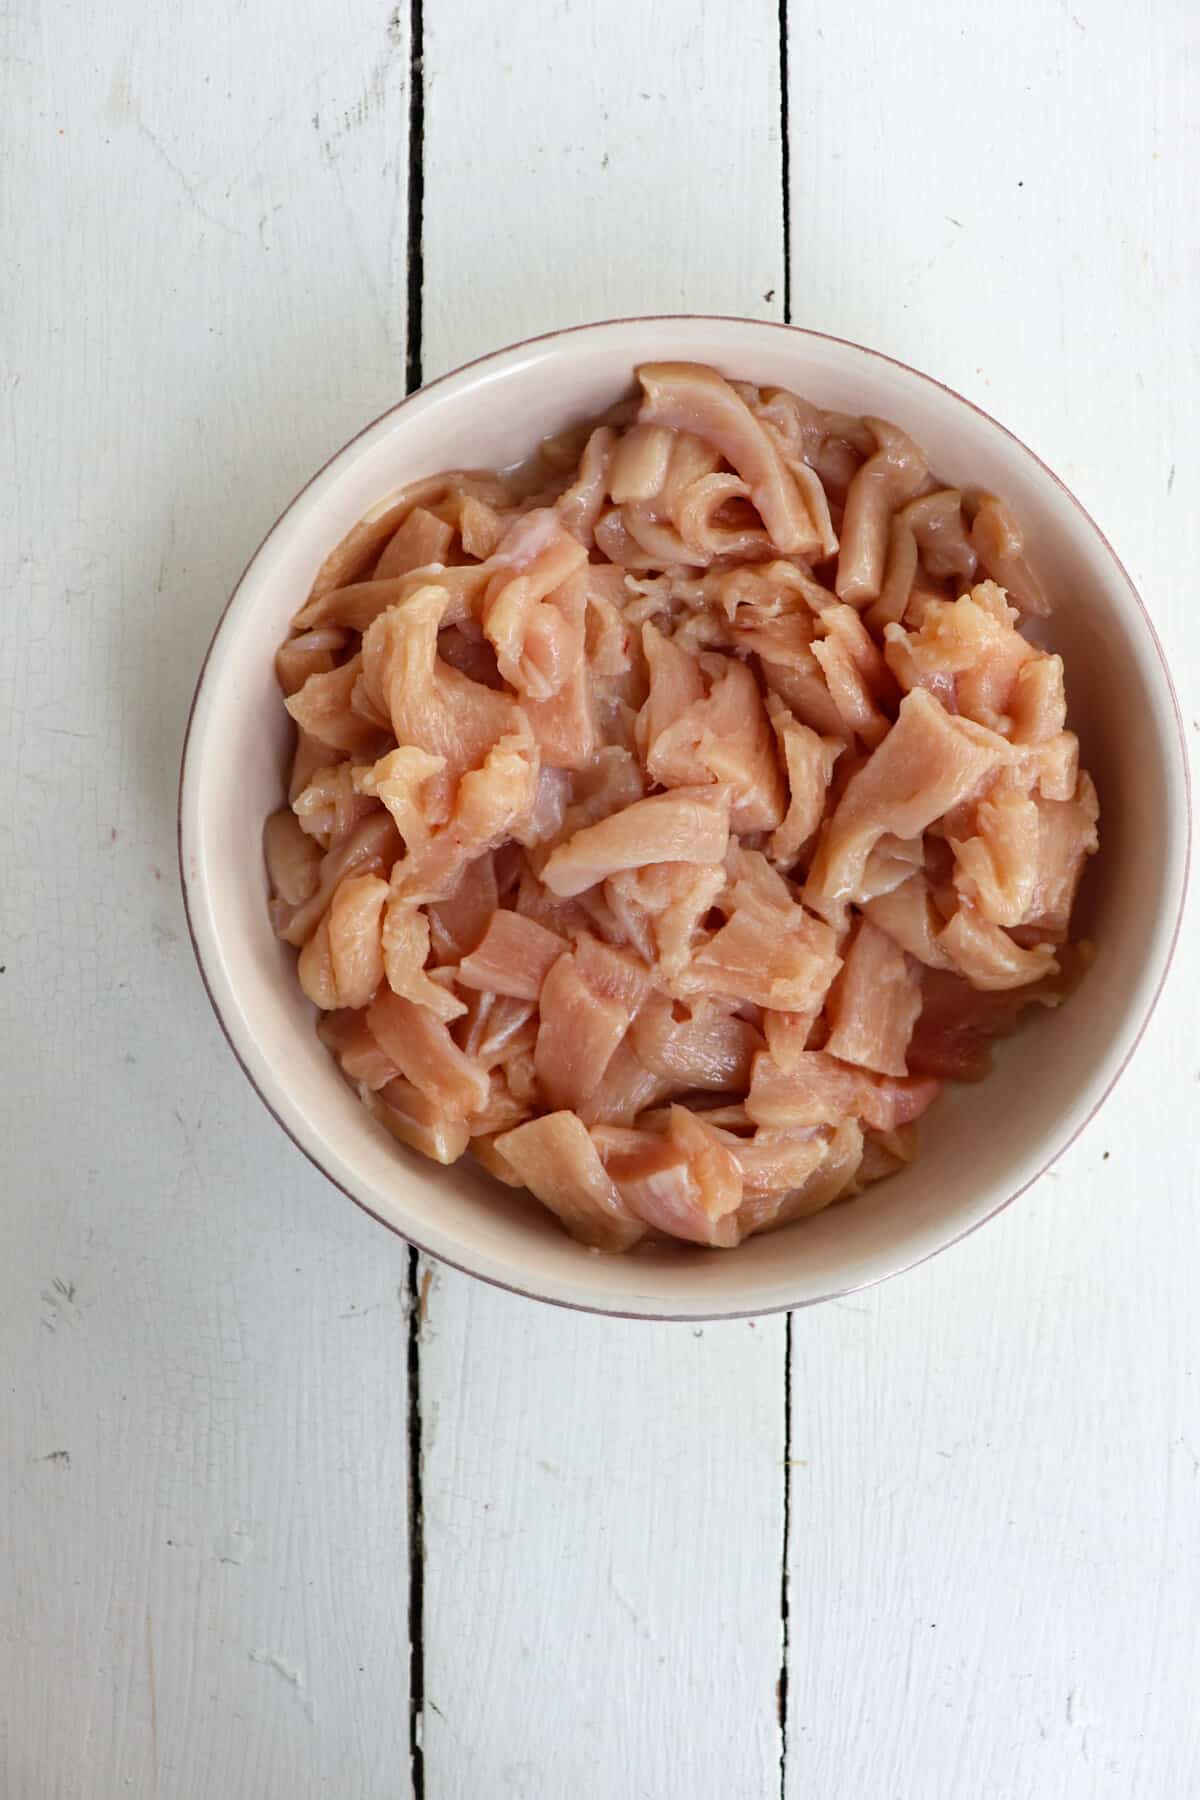 sliced raw chicken in a white bowl.